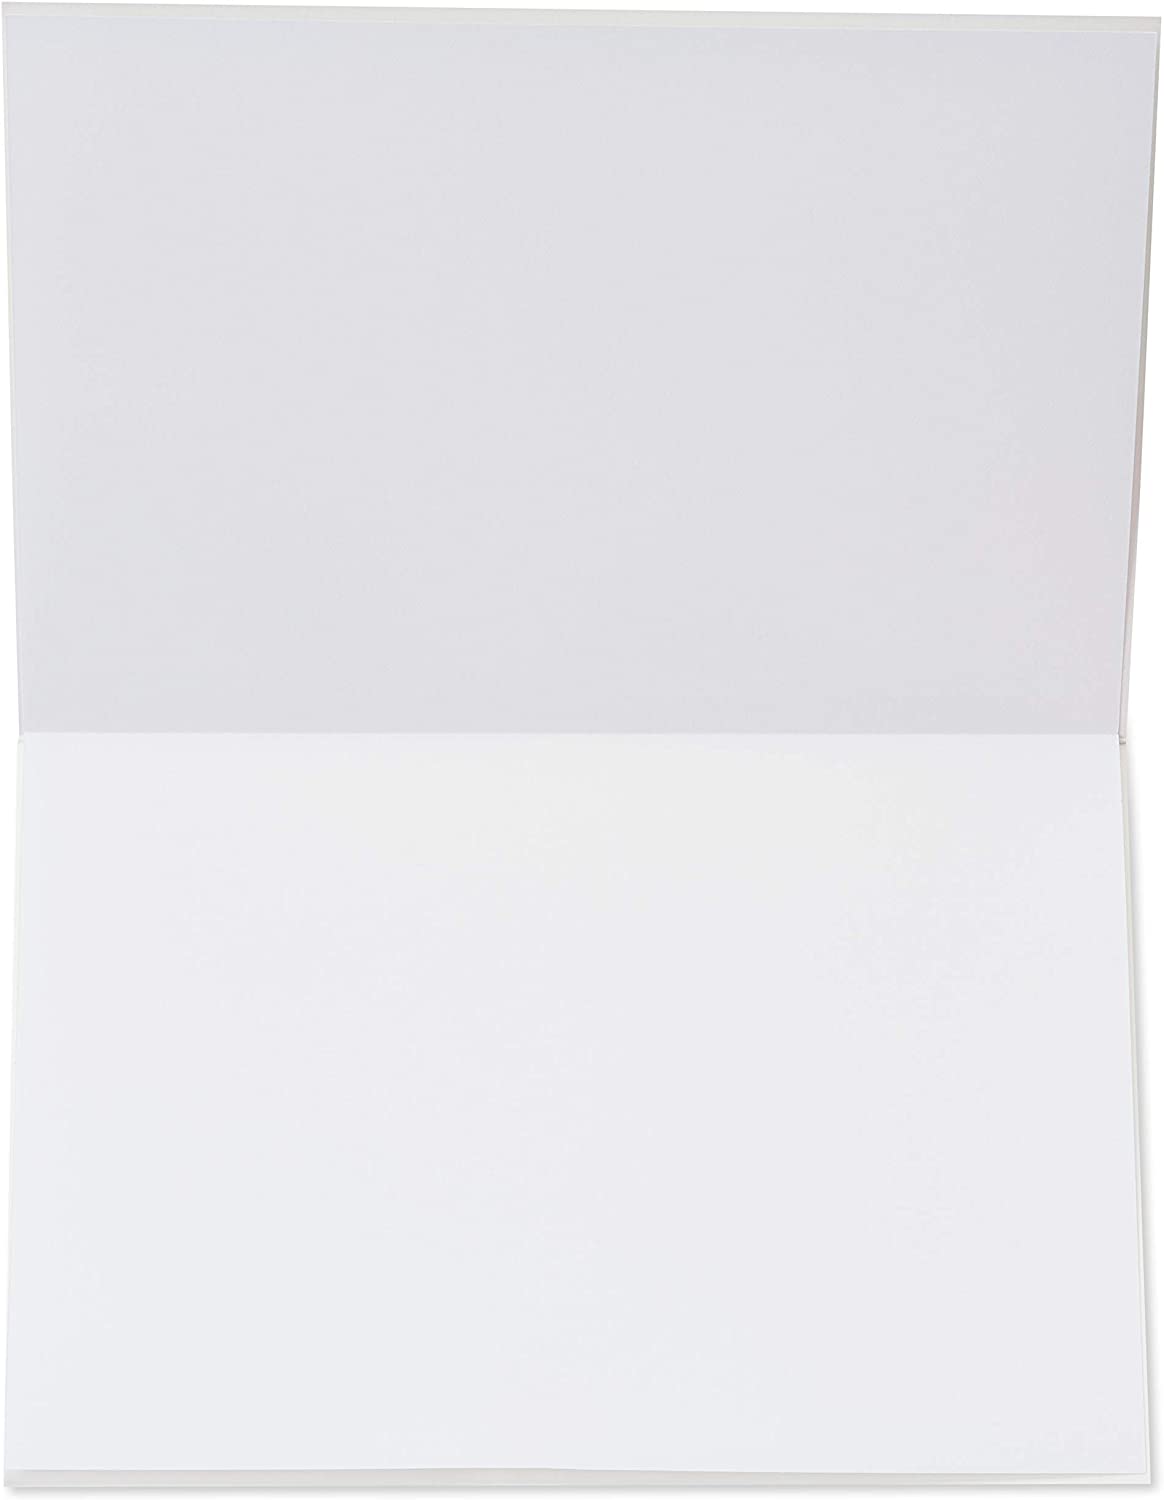 Papyrus Blank Thank You Card (Many Thanks)